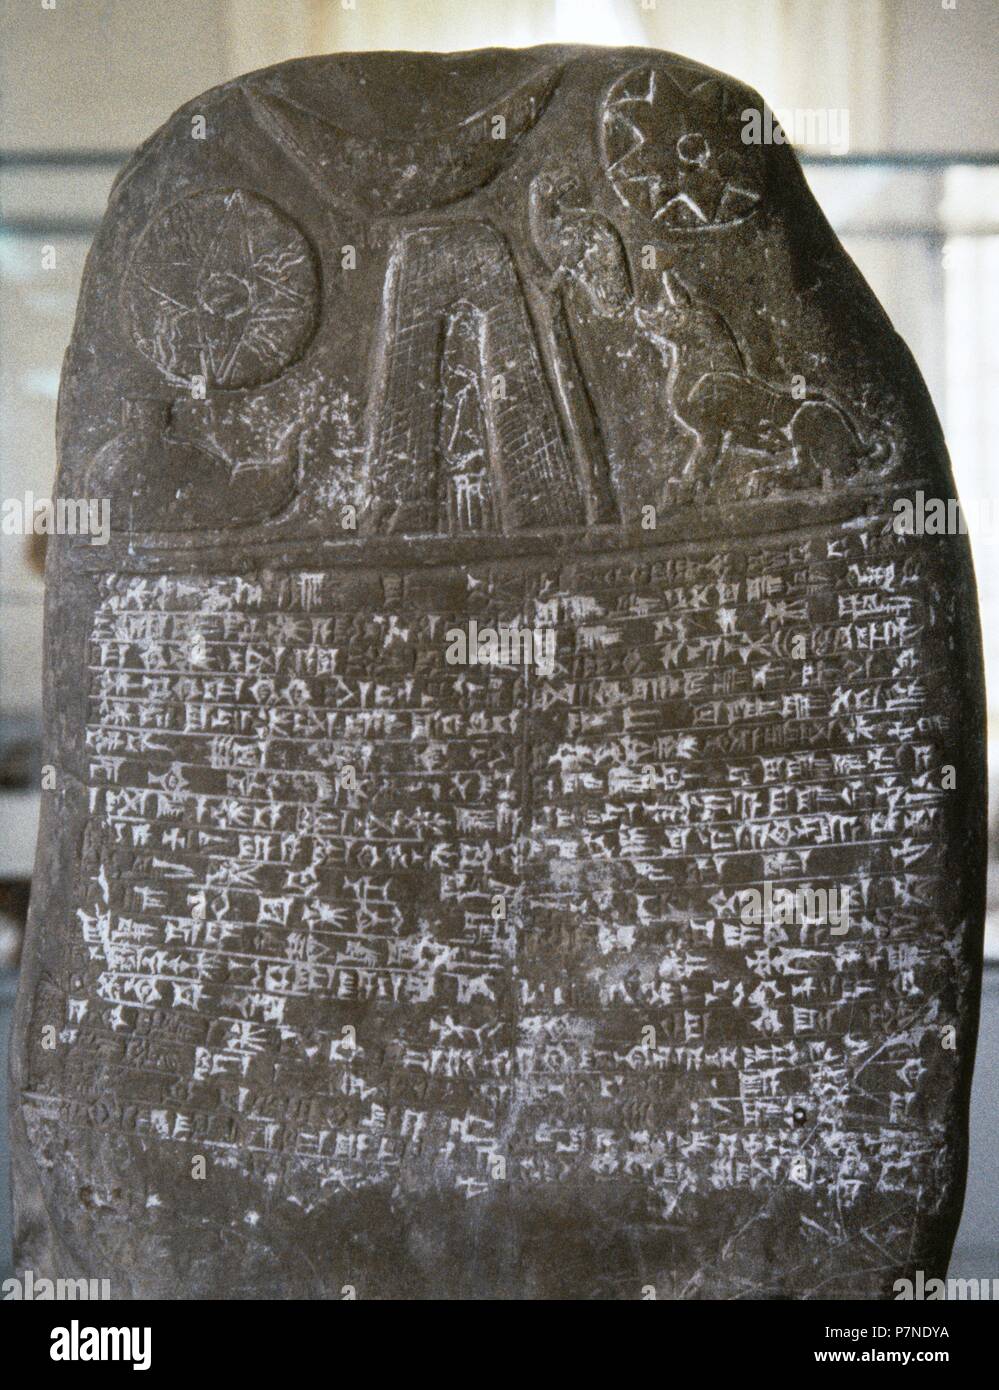 Mesopotamia. Stele, Babylonian origin. Representation of the sun, the moon and water with cuneiform writing in the lower part, 3000 BC. Detail. Archaeological Museum of Iran. Theran, Islamic Republic of Iran. Stock Photo